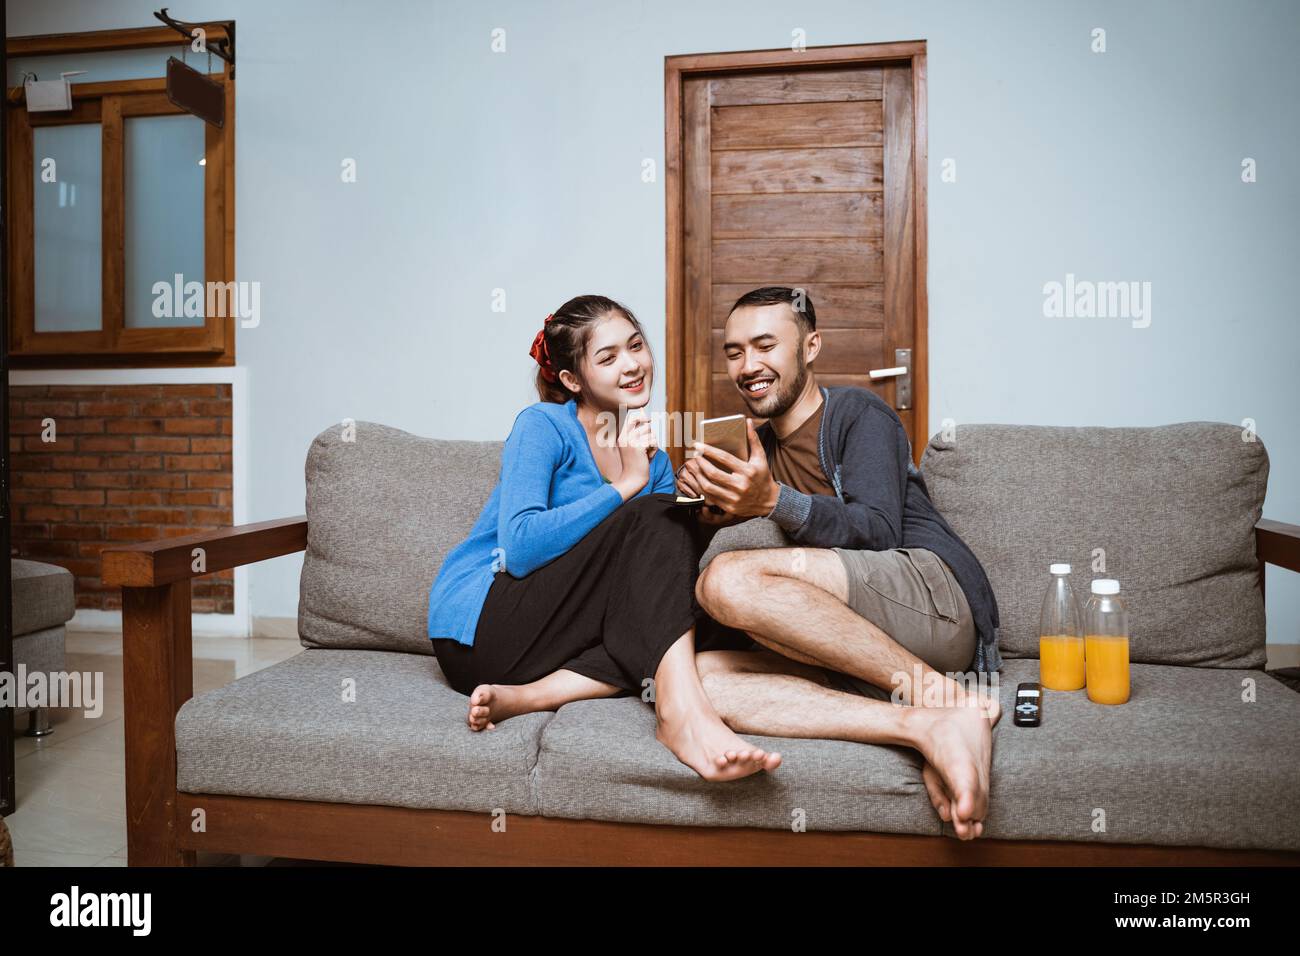 young asian woman and man chatting while using smartphones together Stock Photo